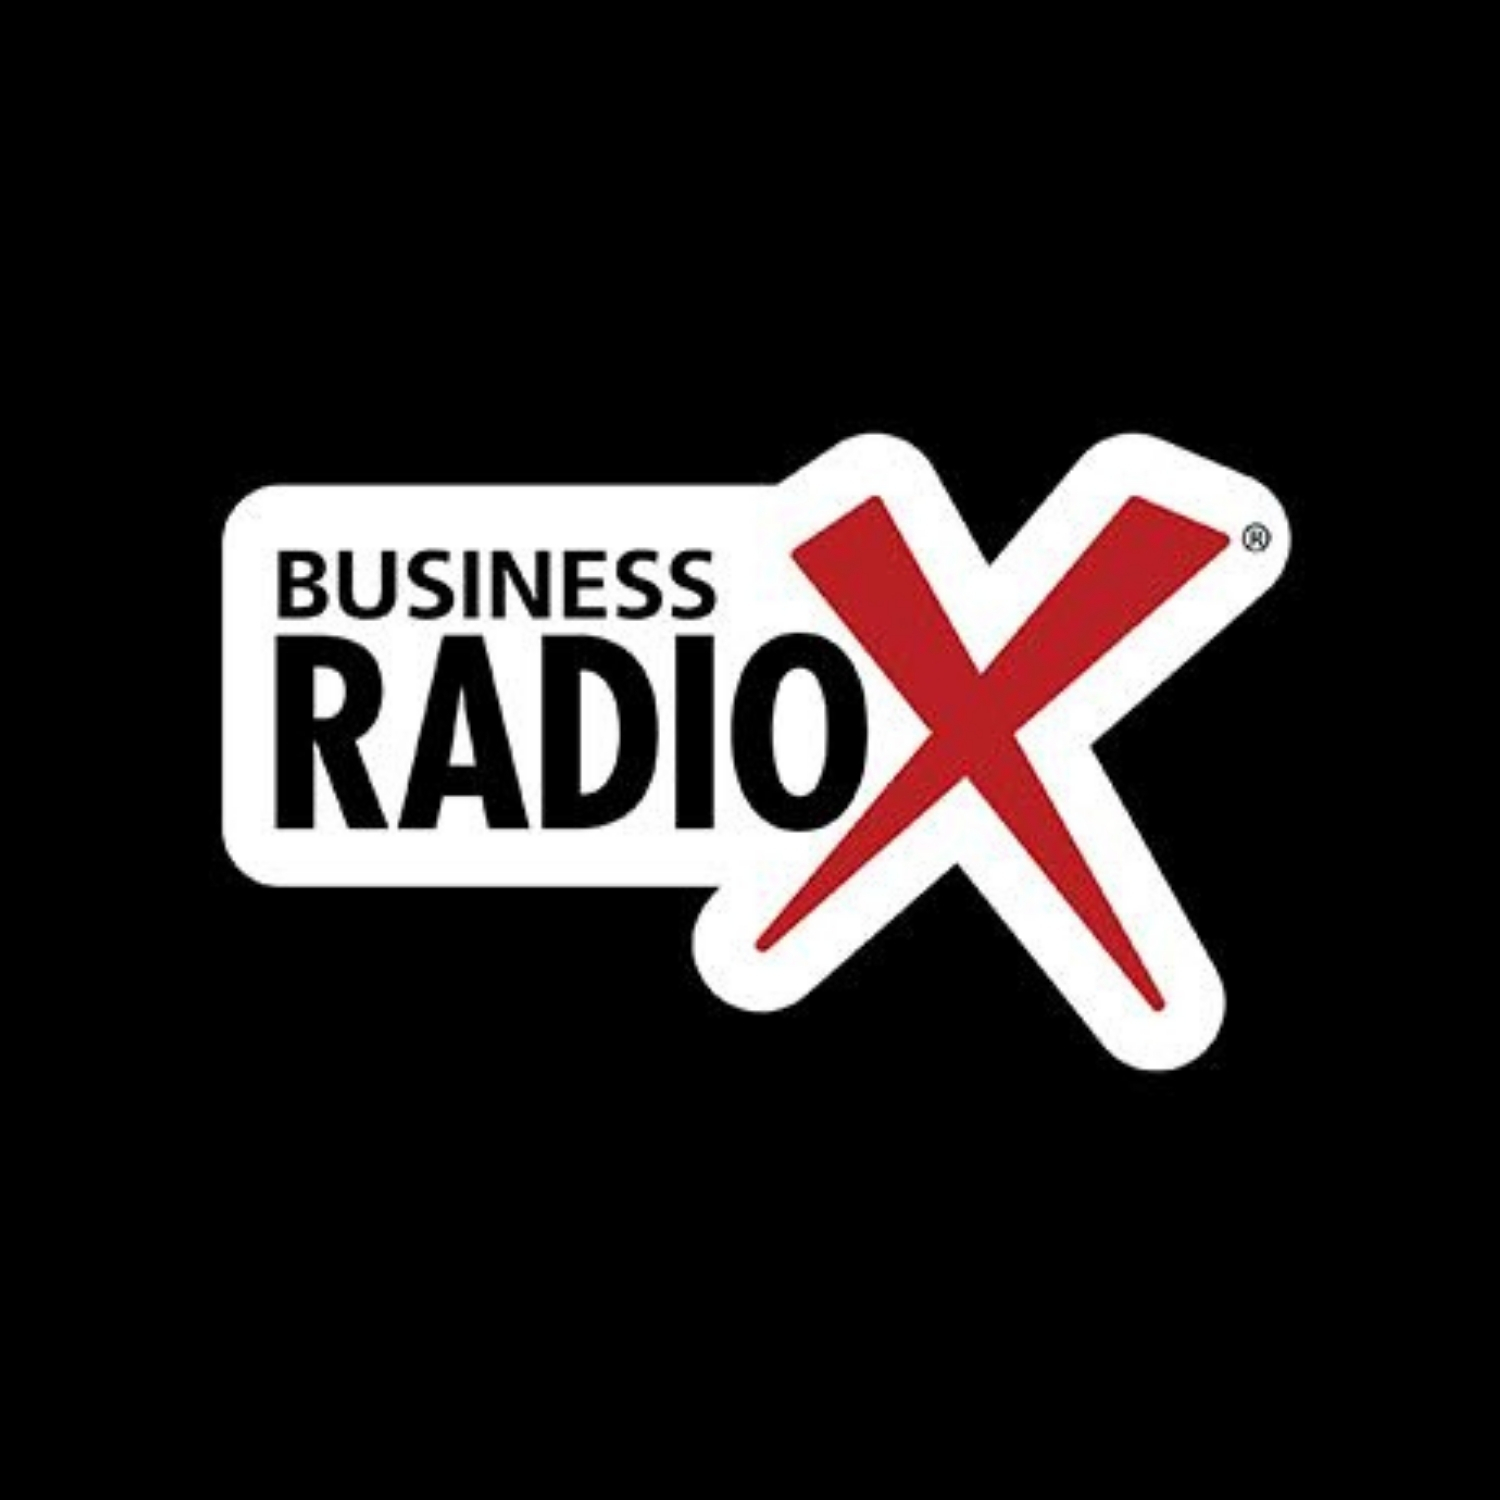 Whitney Wilson with LEGOLAND Discovery Center, Stacy Weenick with Taste of Atlanta, Terry Carver with Bricktop’s, Kit Cummings with Power of Peace Productions, Inc. – Buckhead Business Radio